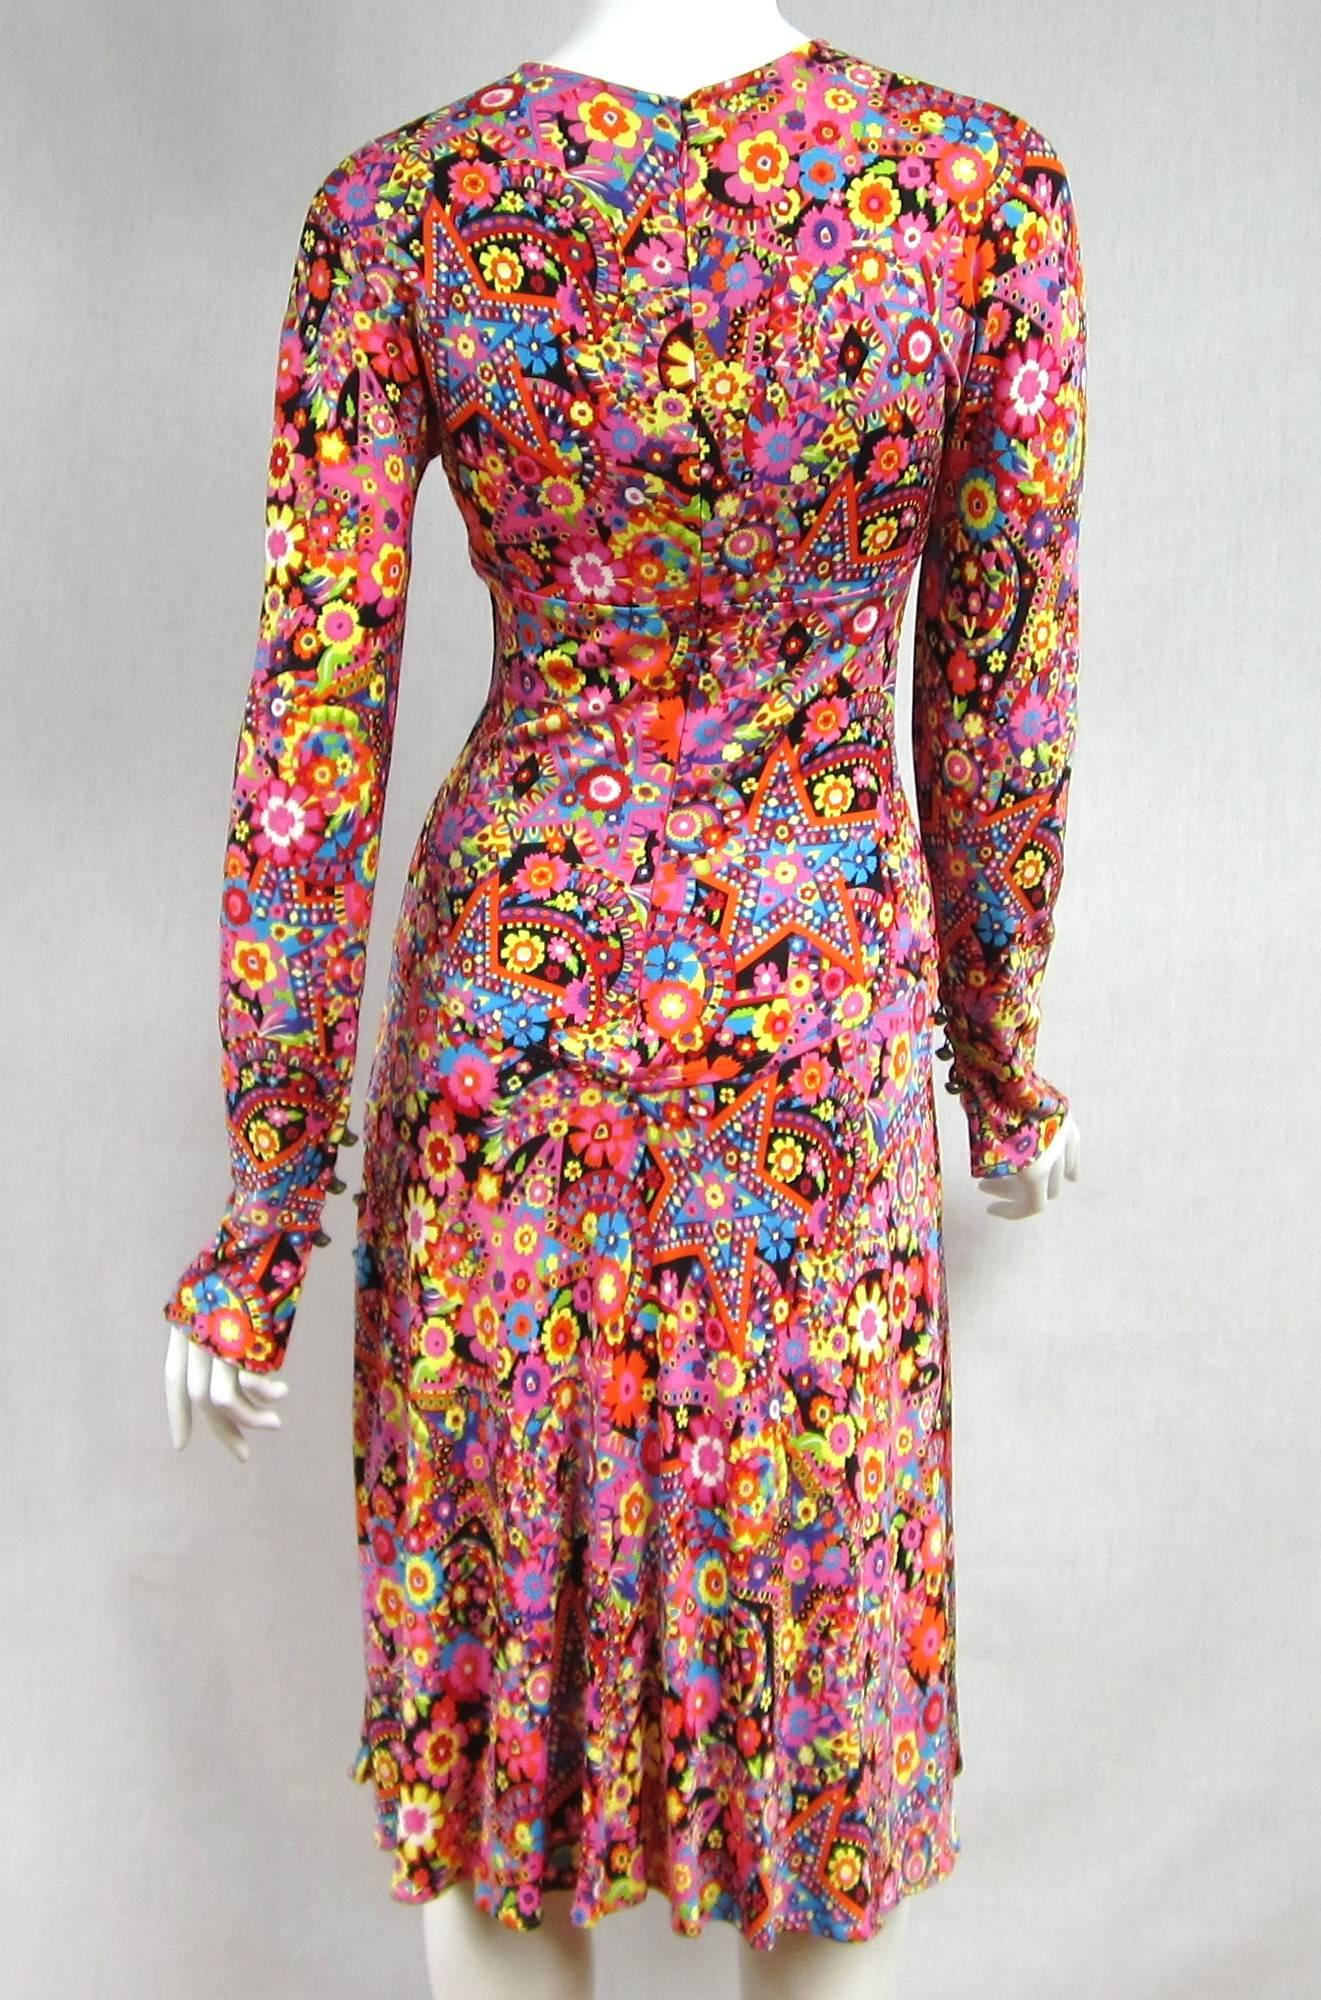 Gianni Versace Couture Floral Abstract Dress 2002 In Excellent Condition For Sale In Wallkill, NY